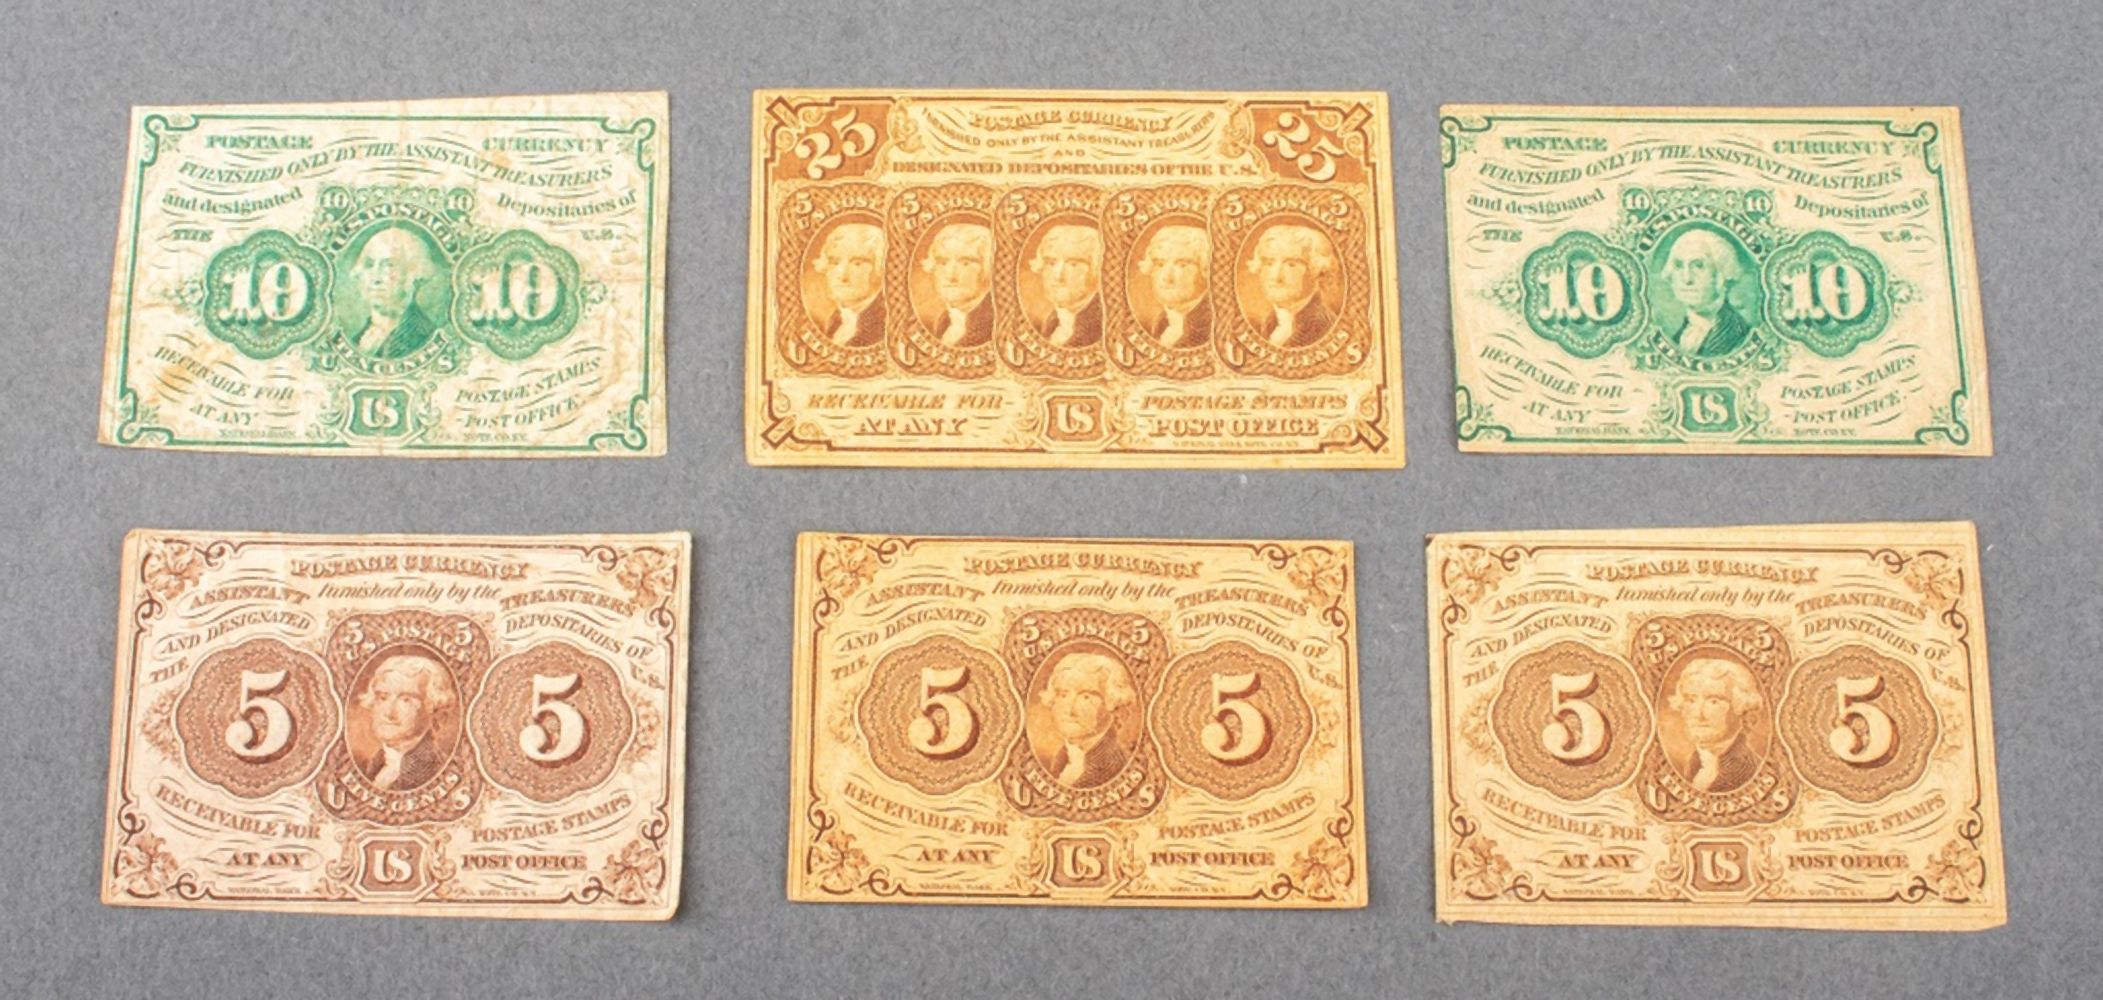 U.S. 1862 FRACTIONAL CURRENCY,